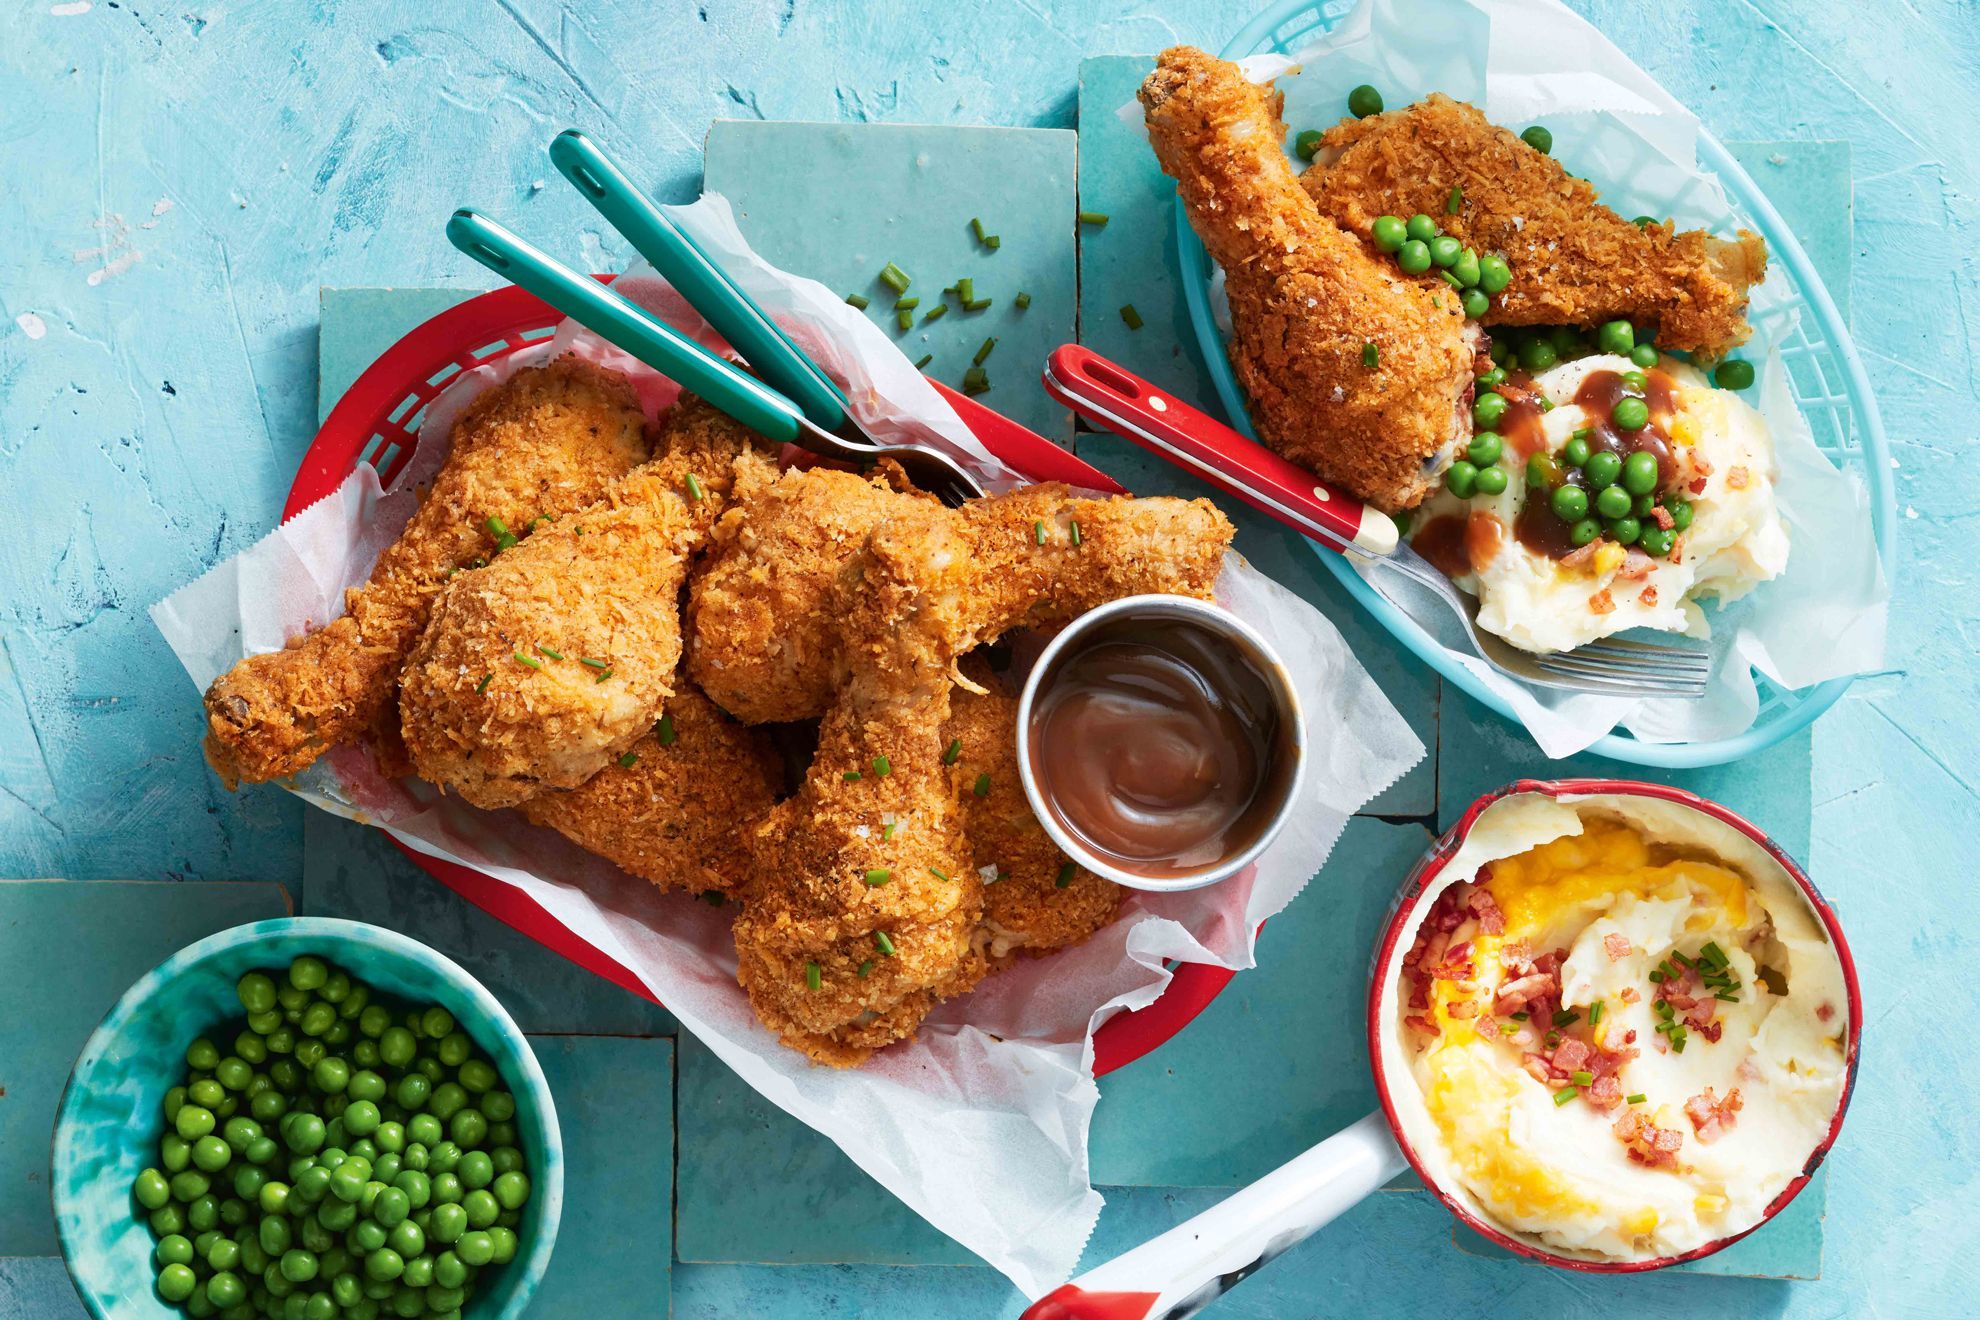 Who has the healthiest fried chicken?